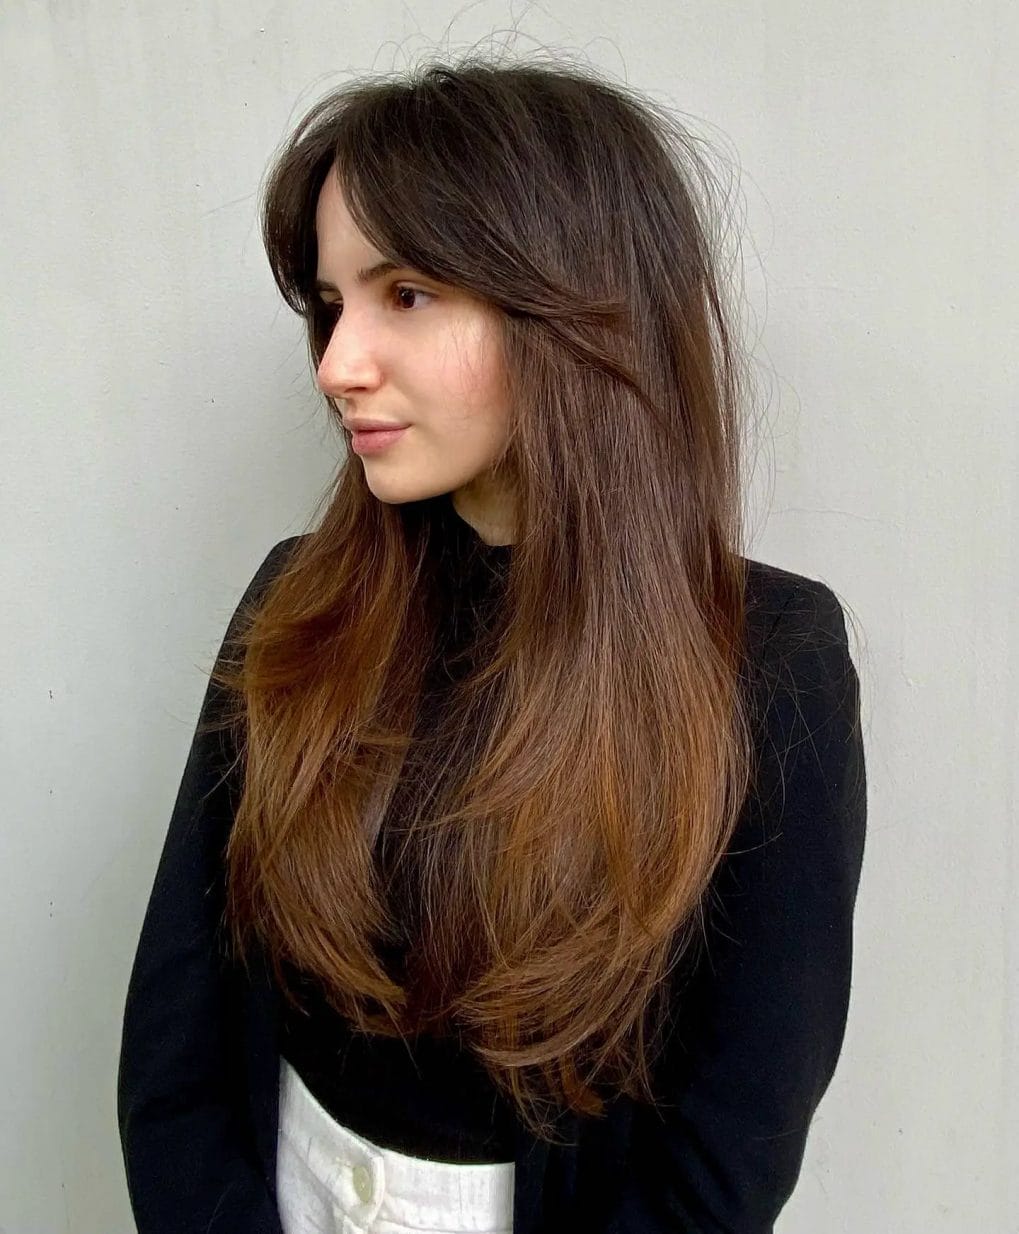 Deep brunette cascading into auburn with delicate feathered bangs, showcasing a soft, romantic look.